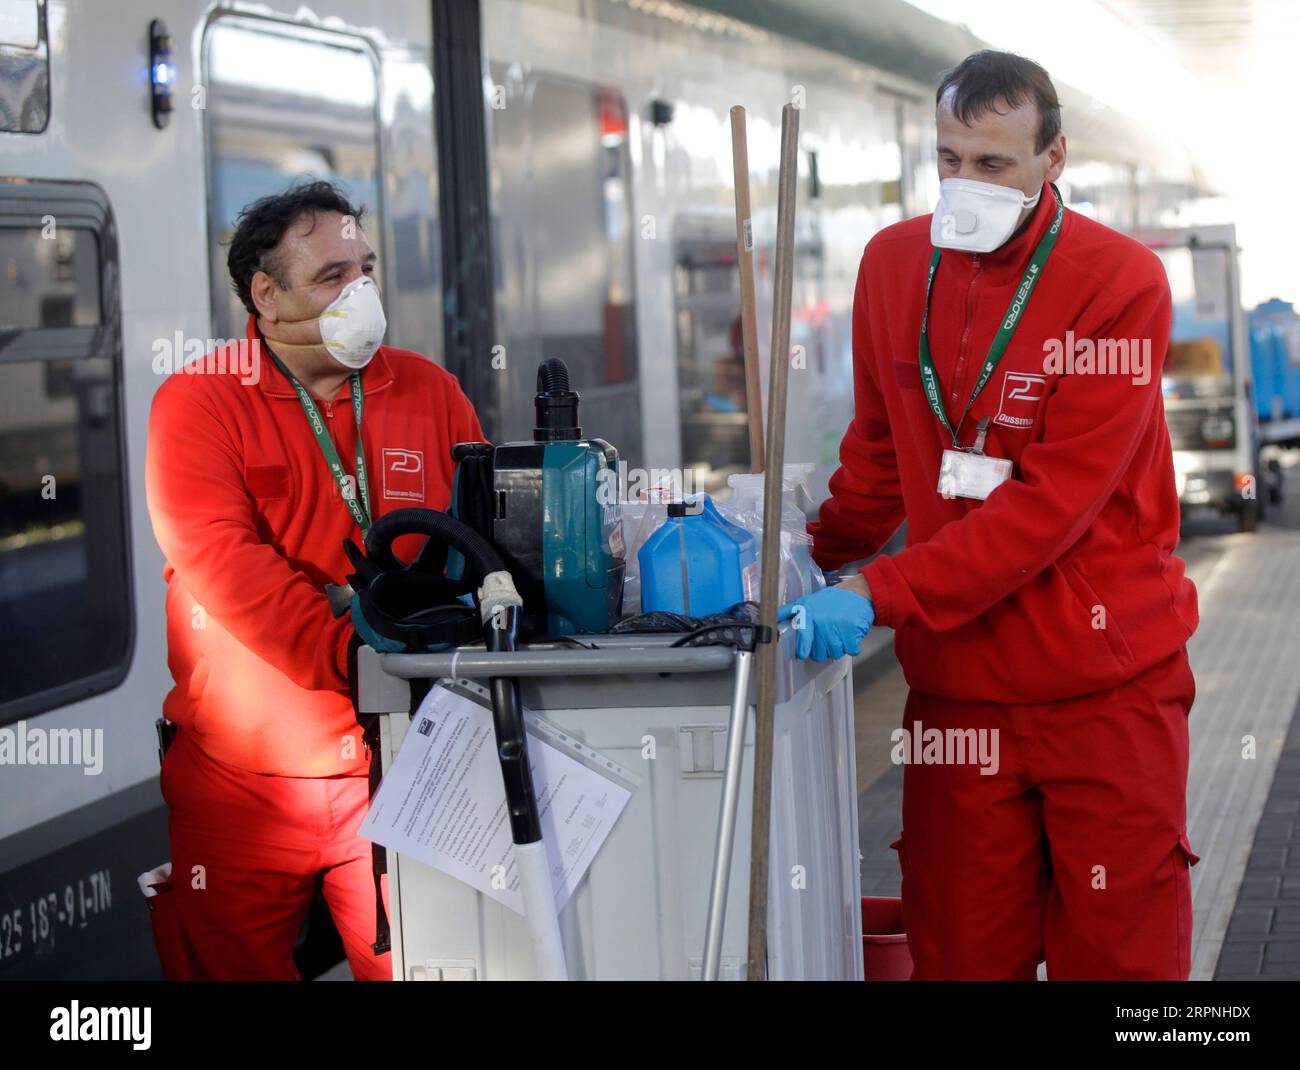 200229 -- MILAN, Feb. 29, 2020 Xinhua -- Staff members sanitize the facilities on a train at the Garibaldi train station in Milan, Italy, Feb. 28, 2020. The total number of confirmed COVID-19 cases in Italy have increased to 888, including 21 fatalities and 46 recoveries, according to the Ministry of Health on Friday. Photo by Alberto Lingria/Xinhua ITALY-MILAN-COVID-19 PUBLICATIONxNOTxINxCHN Stock Photo